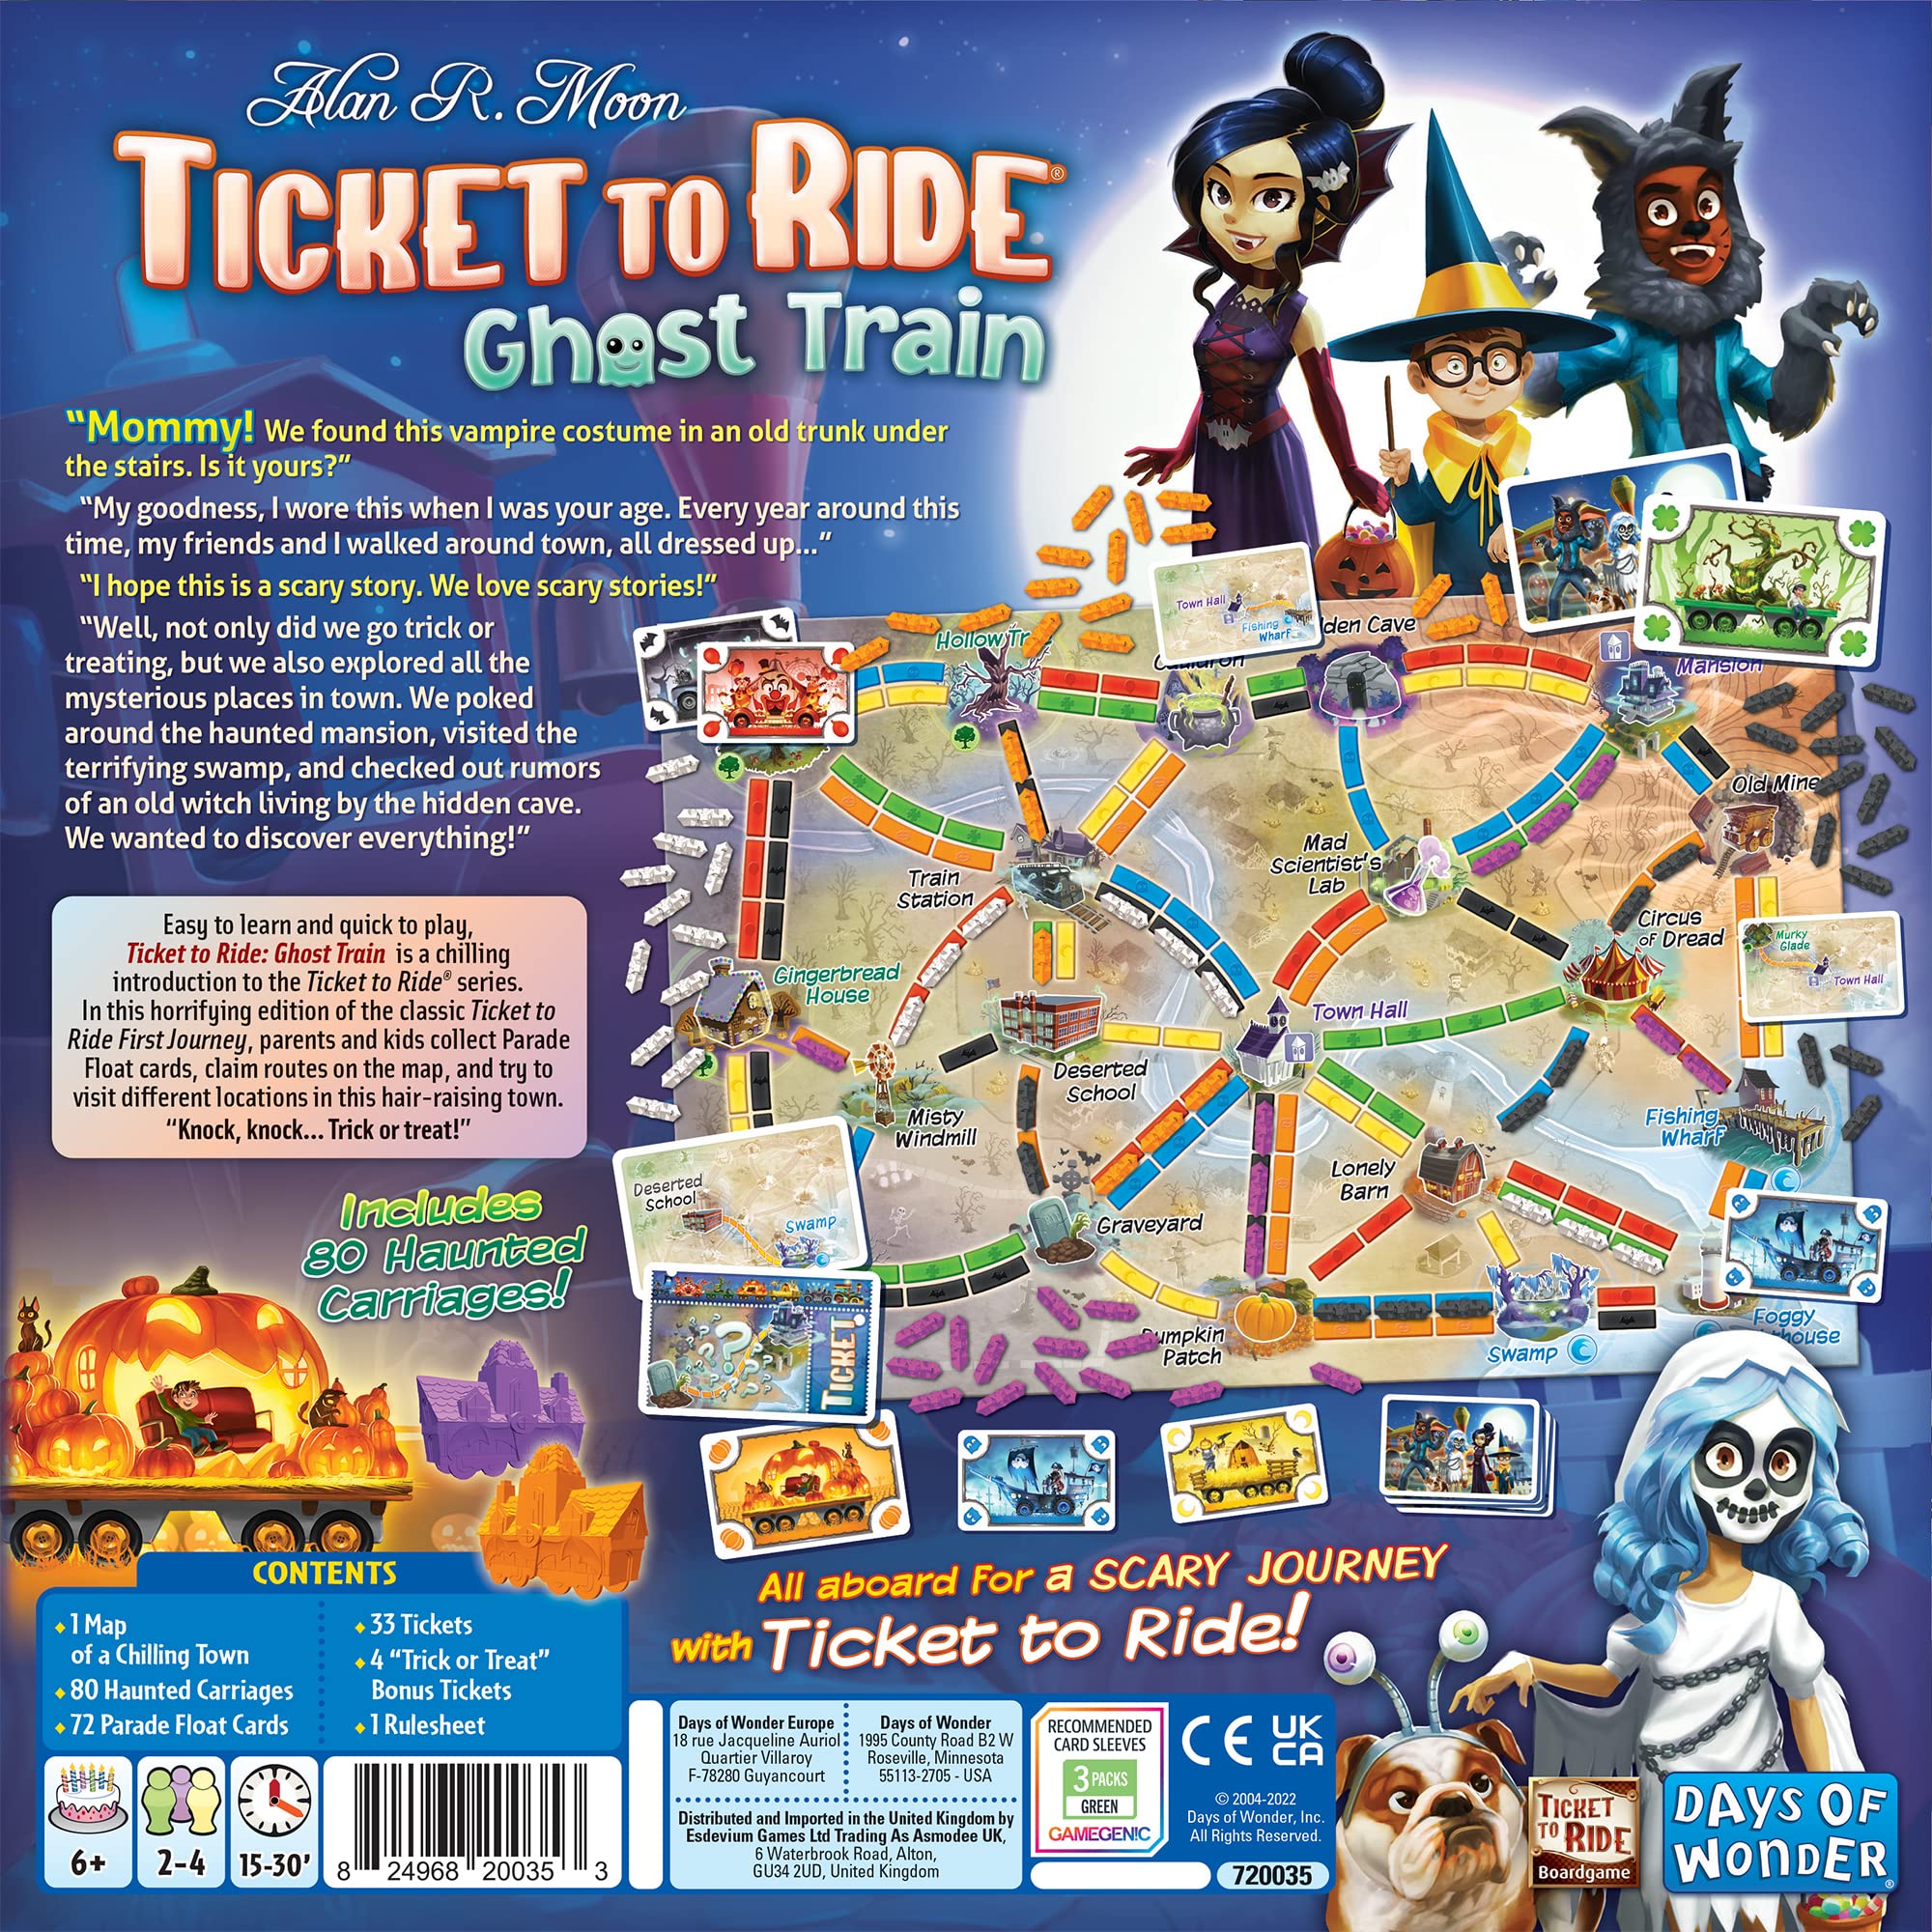 Ticket to Ride Ghost Train Board Game | Train Themed Strategy Game | Fun Family Adventure Game for Adults and Kids | Ages 6+ | 2-4 Players | Average Playtime 15-30 Minutes | Made by Days of Wonder